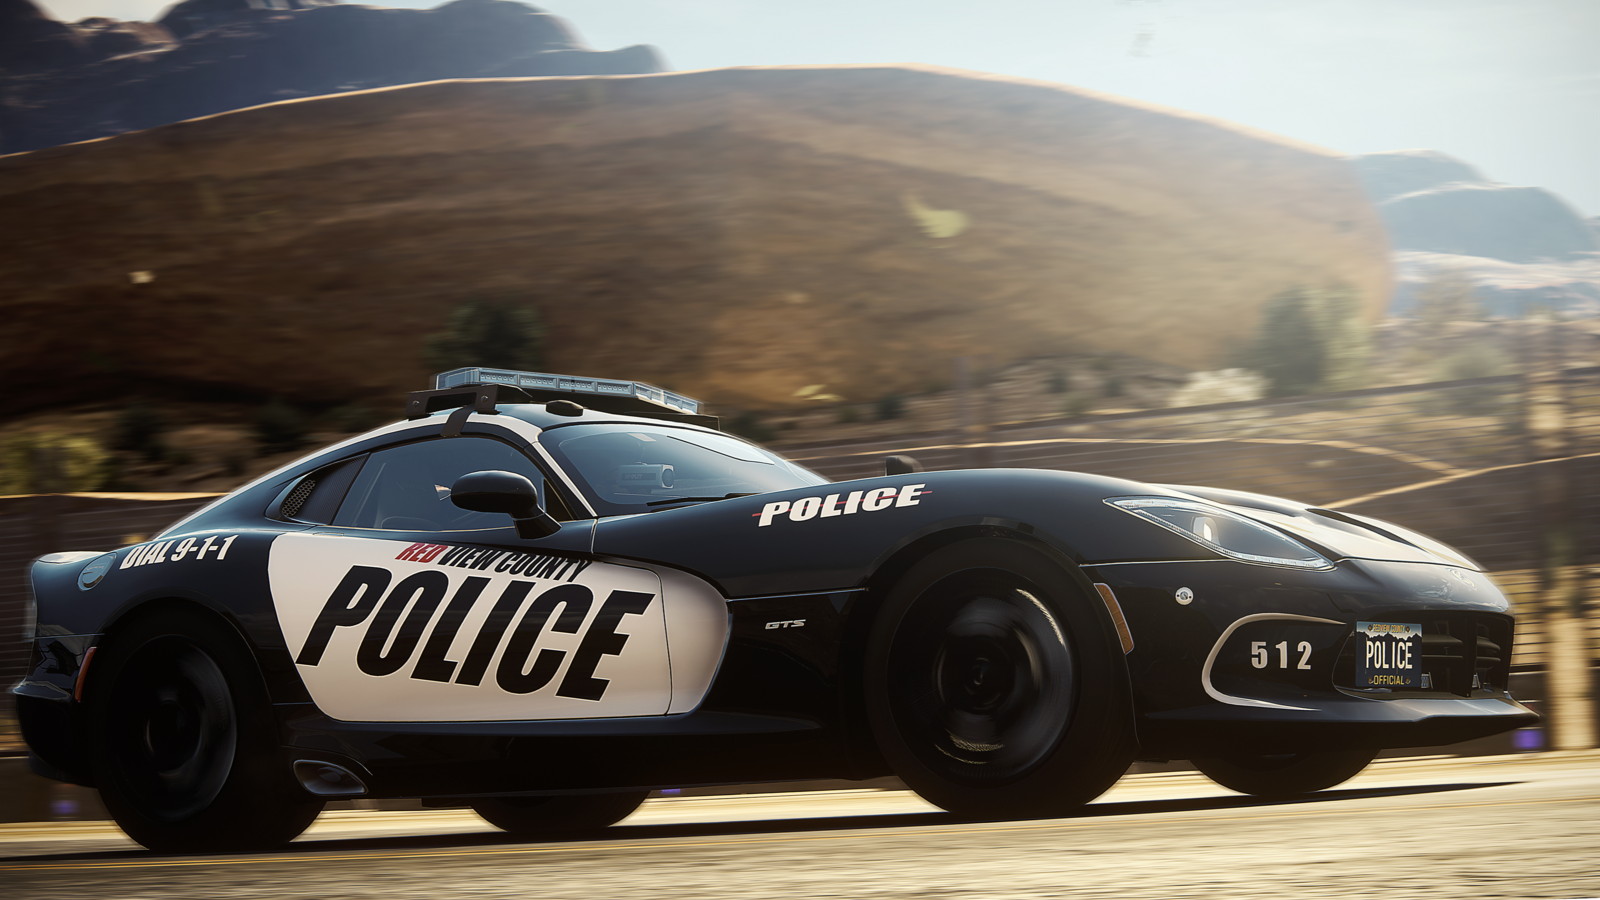 Cops are out in force in NFS Rivals